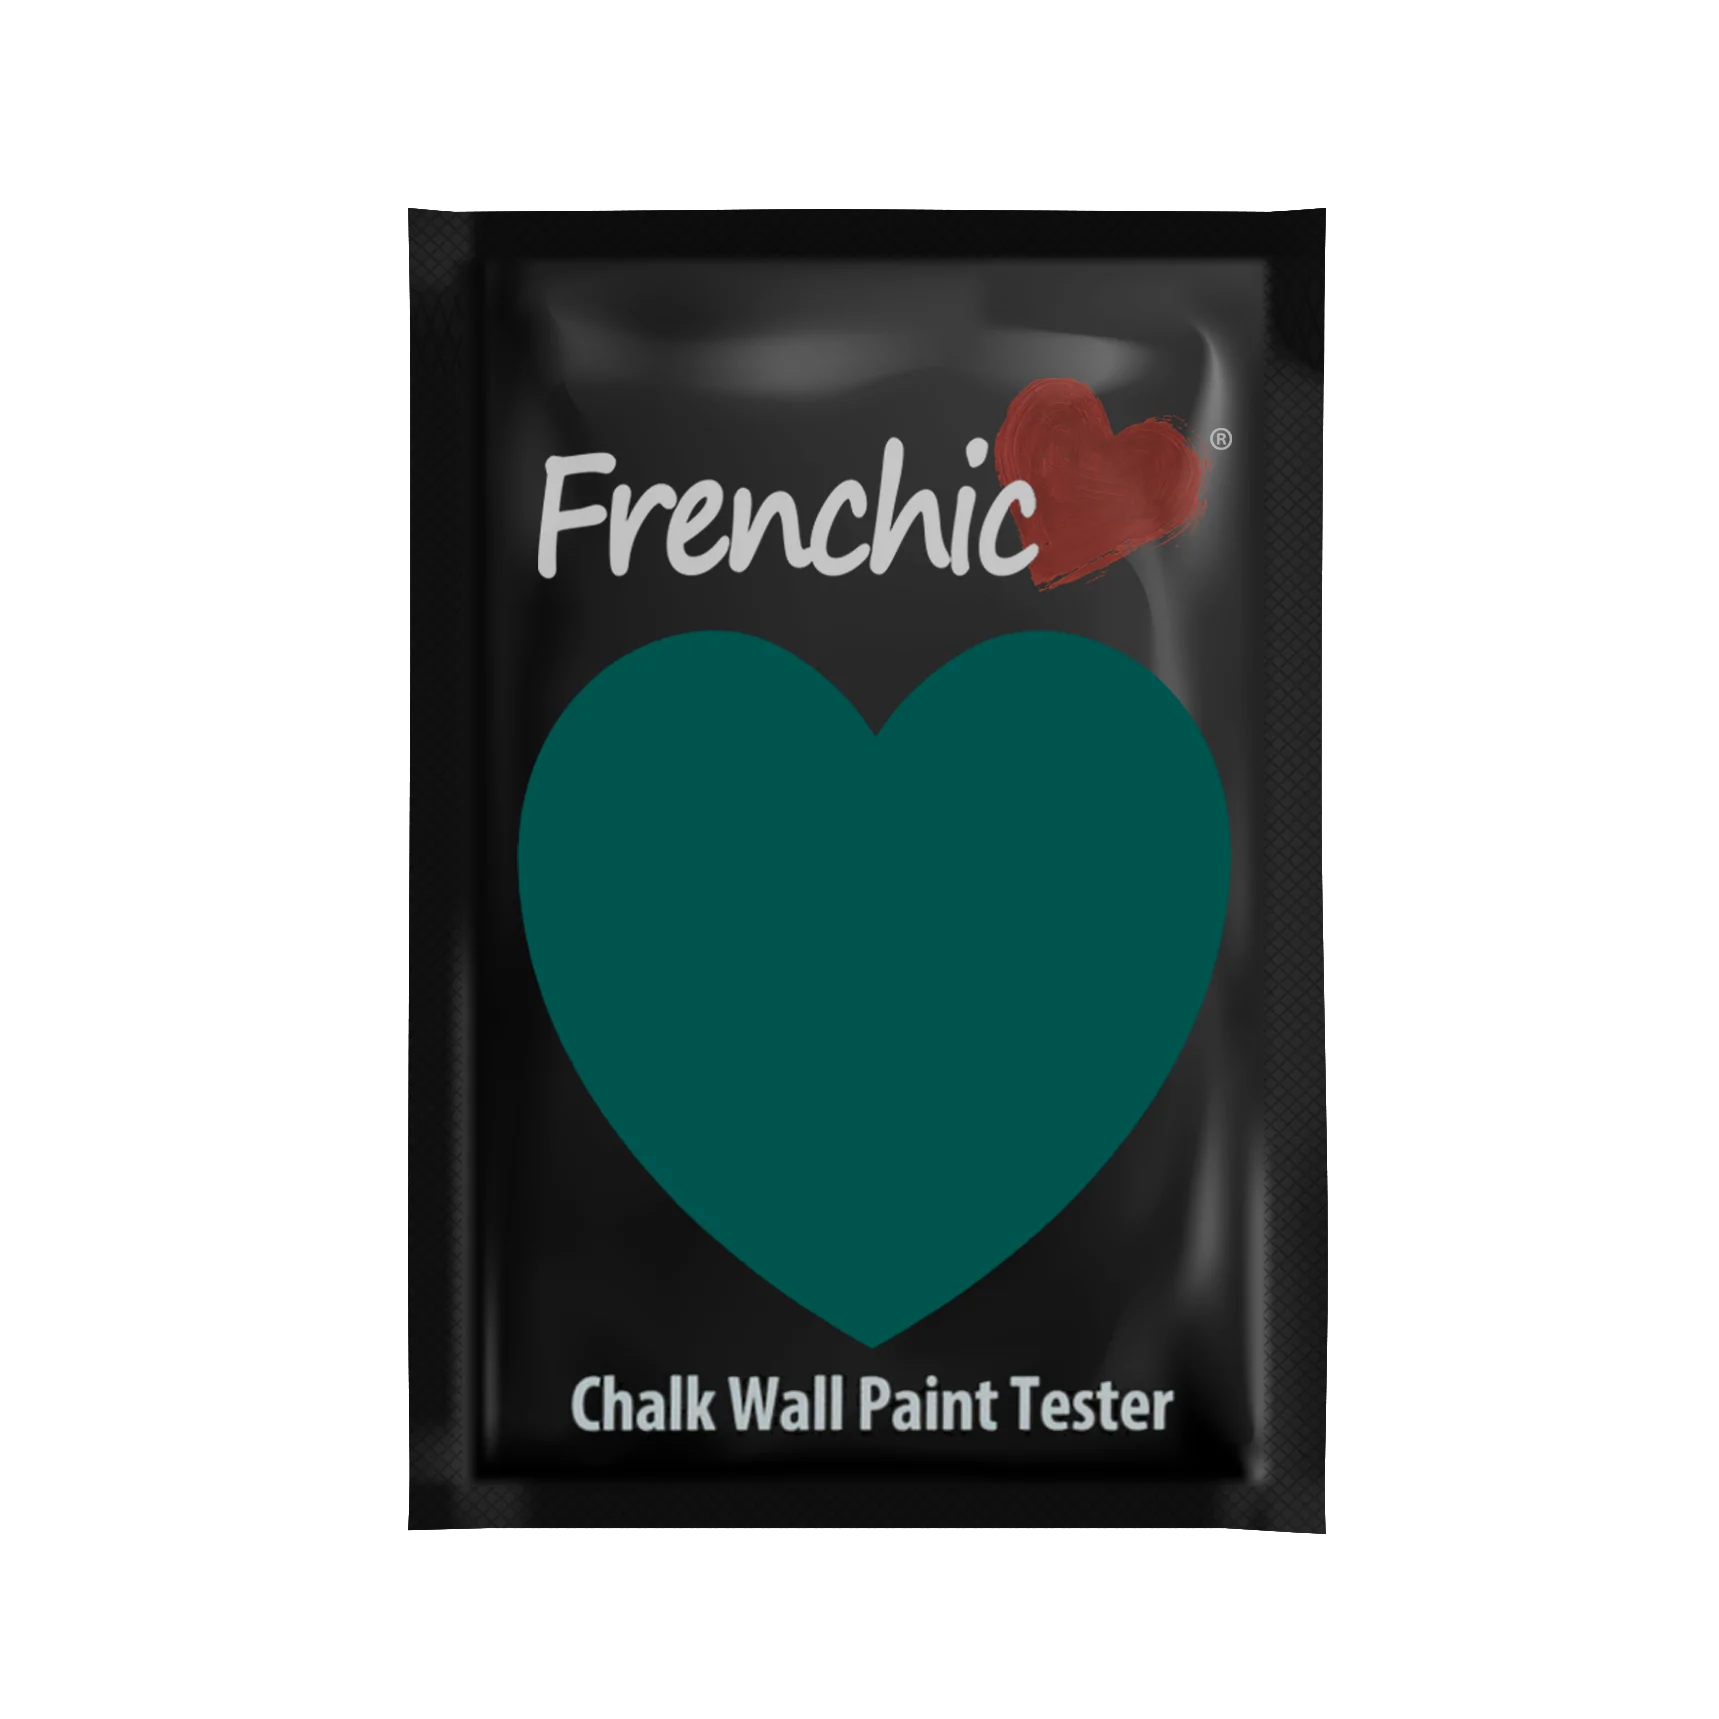 Frenchic Paint | Victory Lane Wall Paint Sample by Weirs of Baggot Street